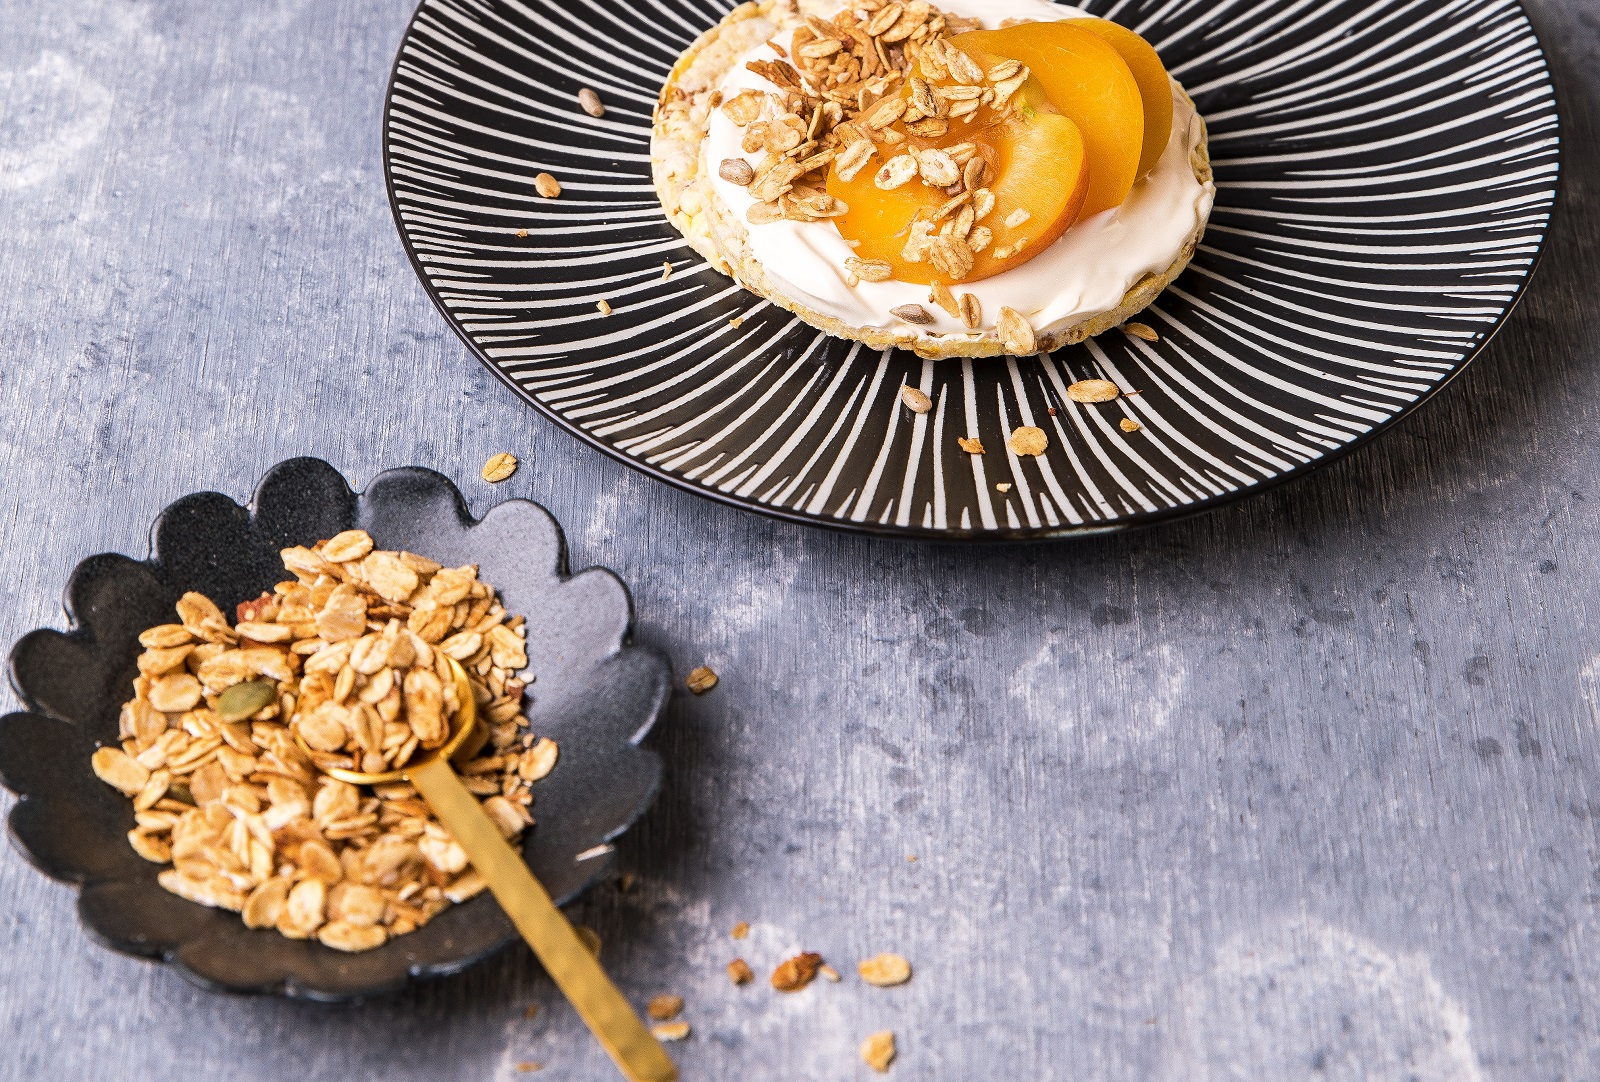 Cream Cheese, Apricot & Muesli for breakfast on Corn Thins slices